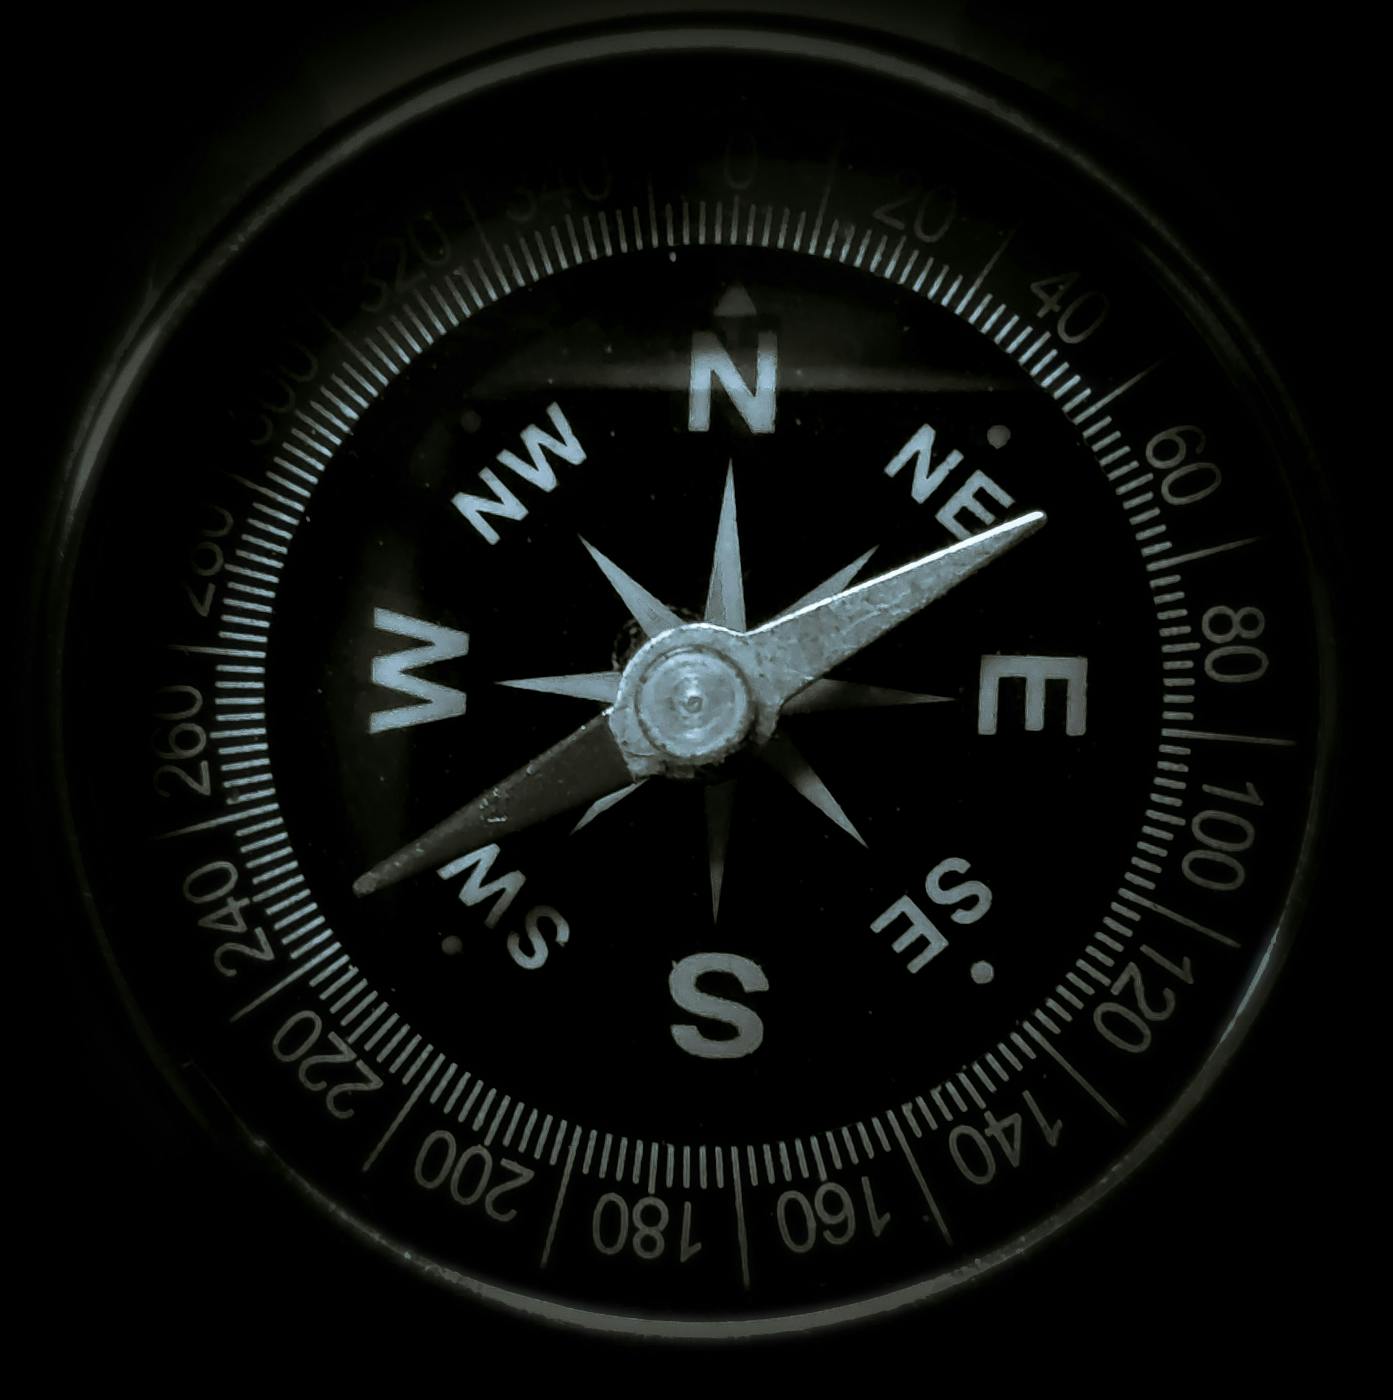 Black & White image of a compass, pointing to NE